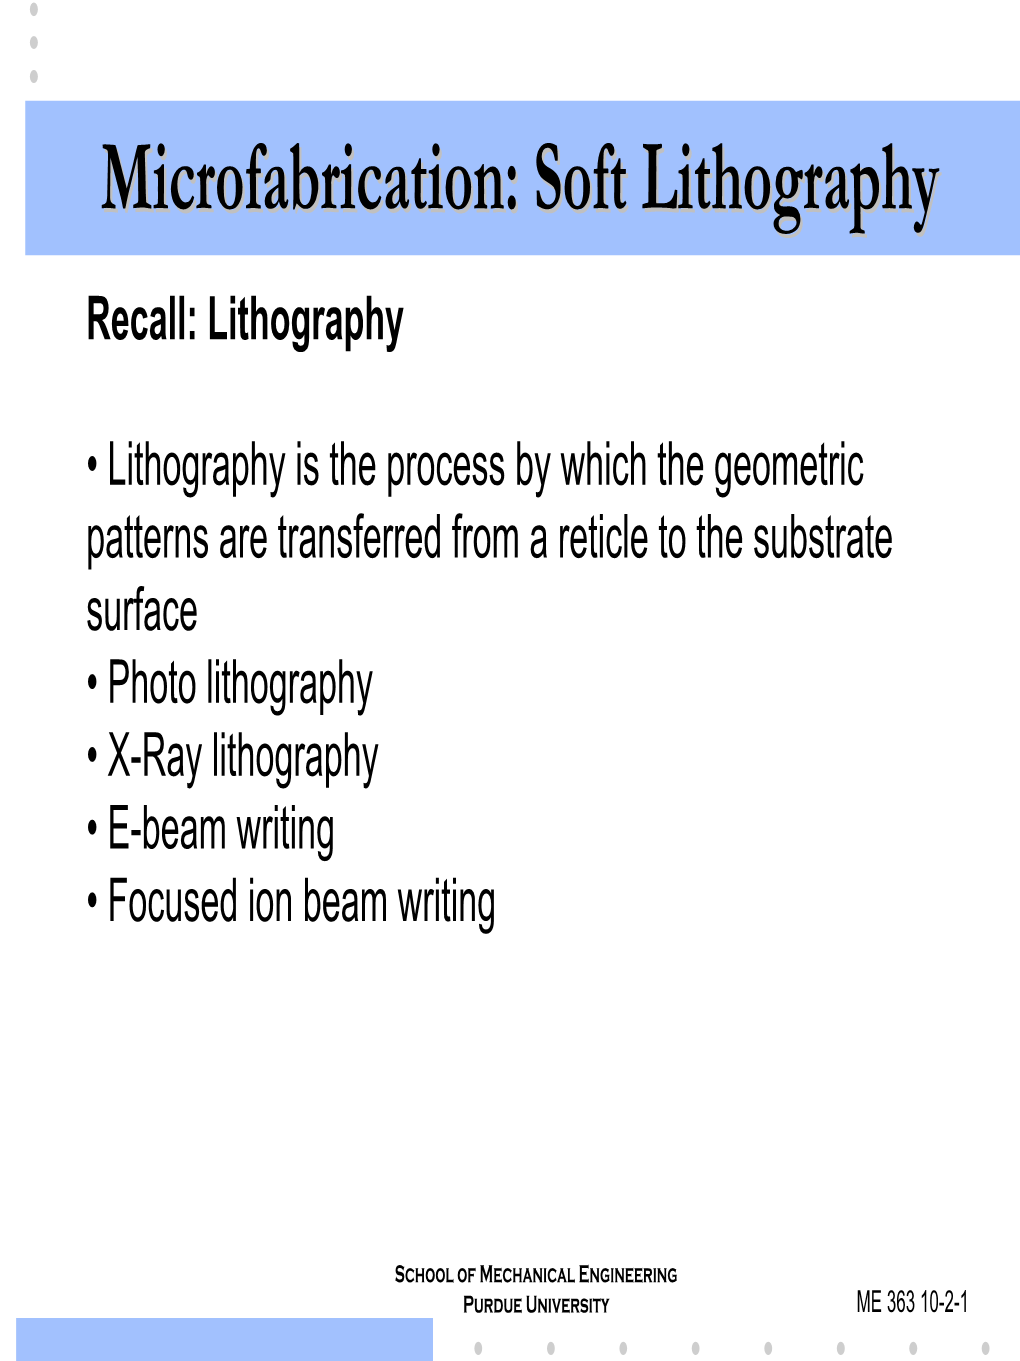 Microfabrication: Soft Lithography